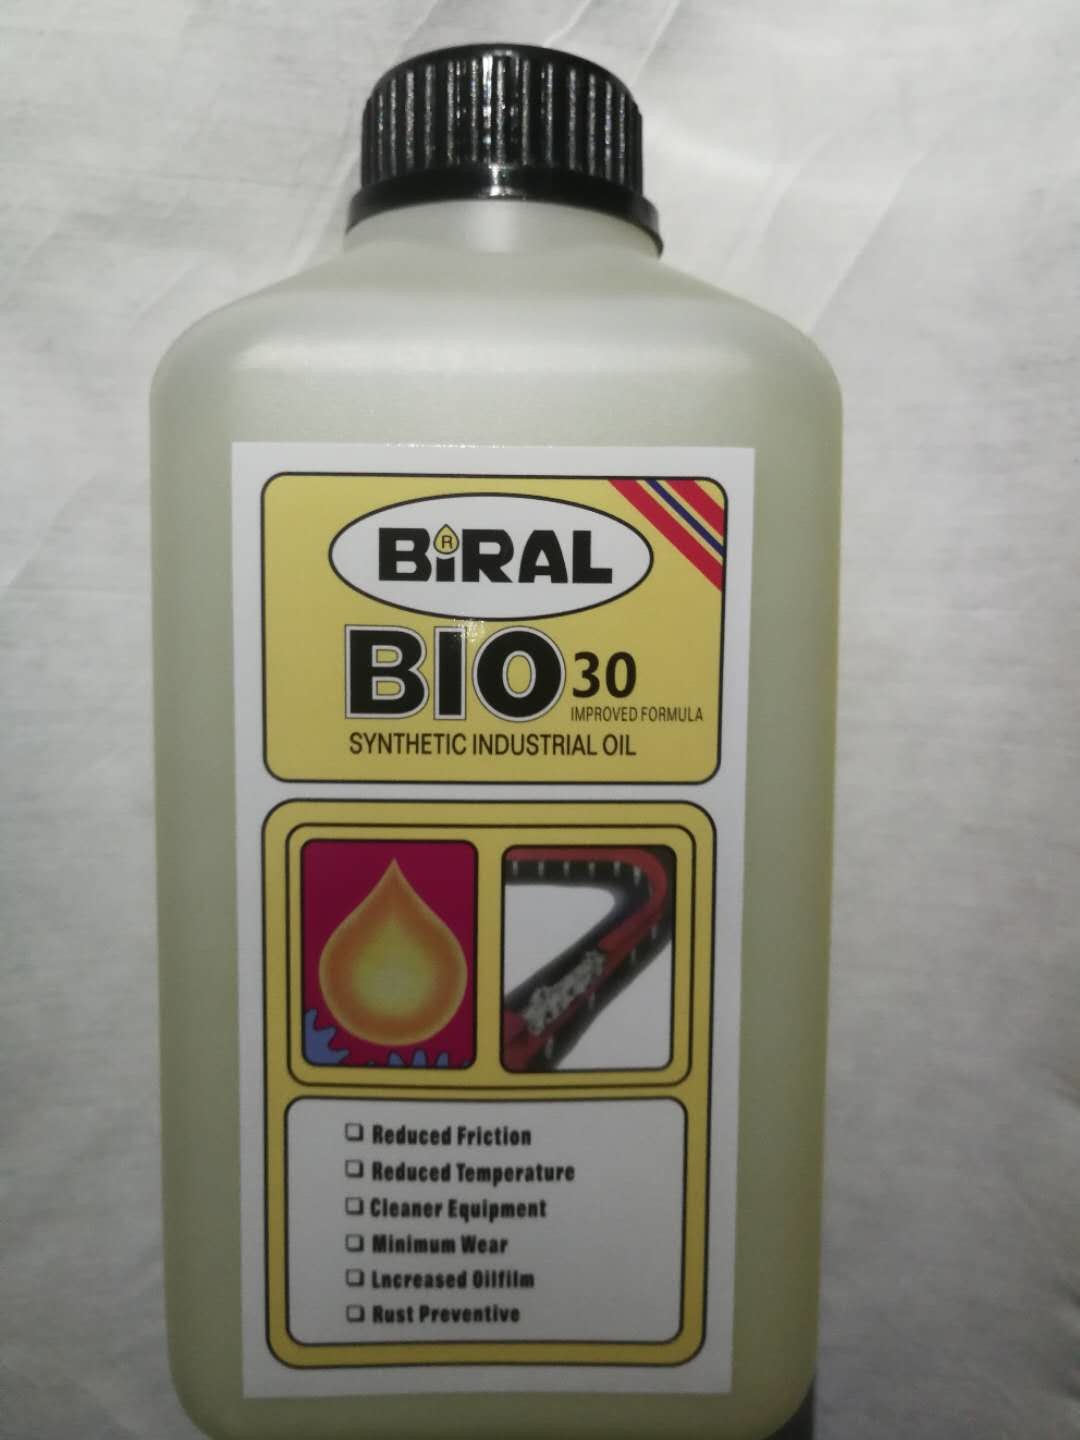 High Temperature Grease Lube Biral Bio 30 Biral Synthetic Industrial Oil